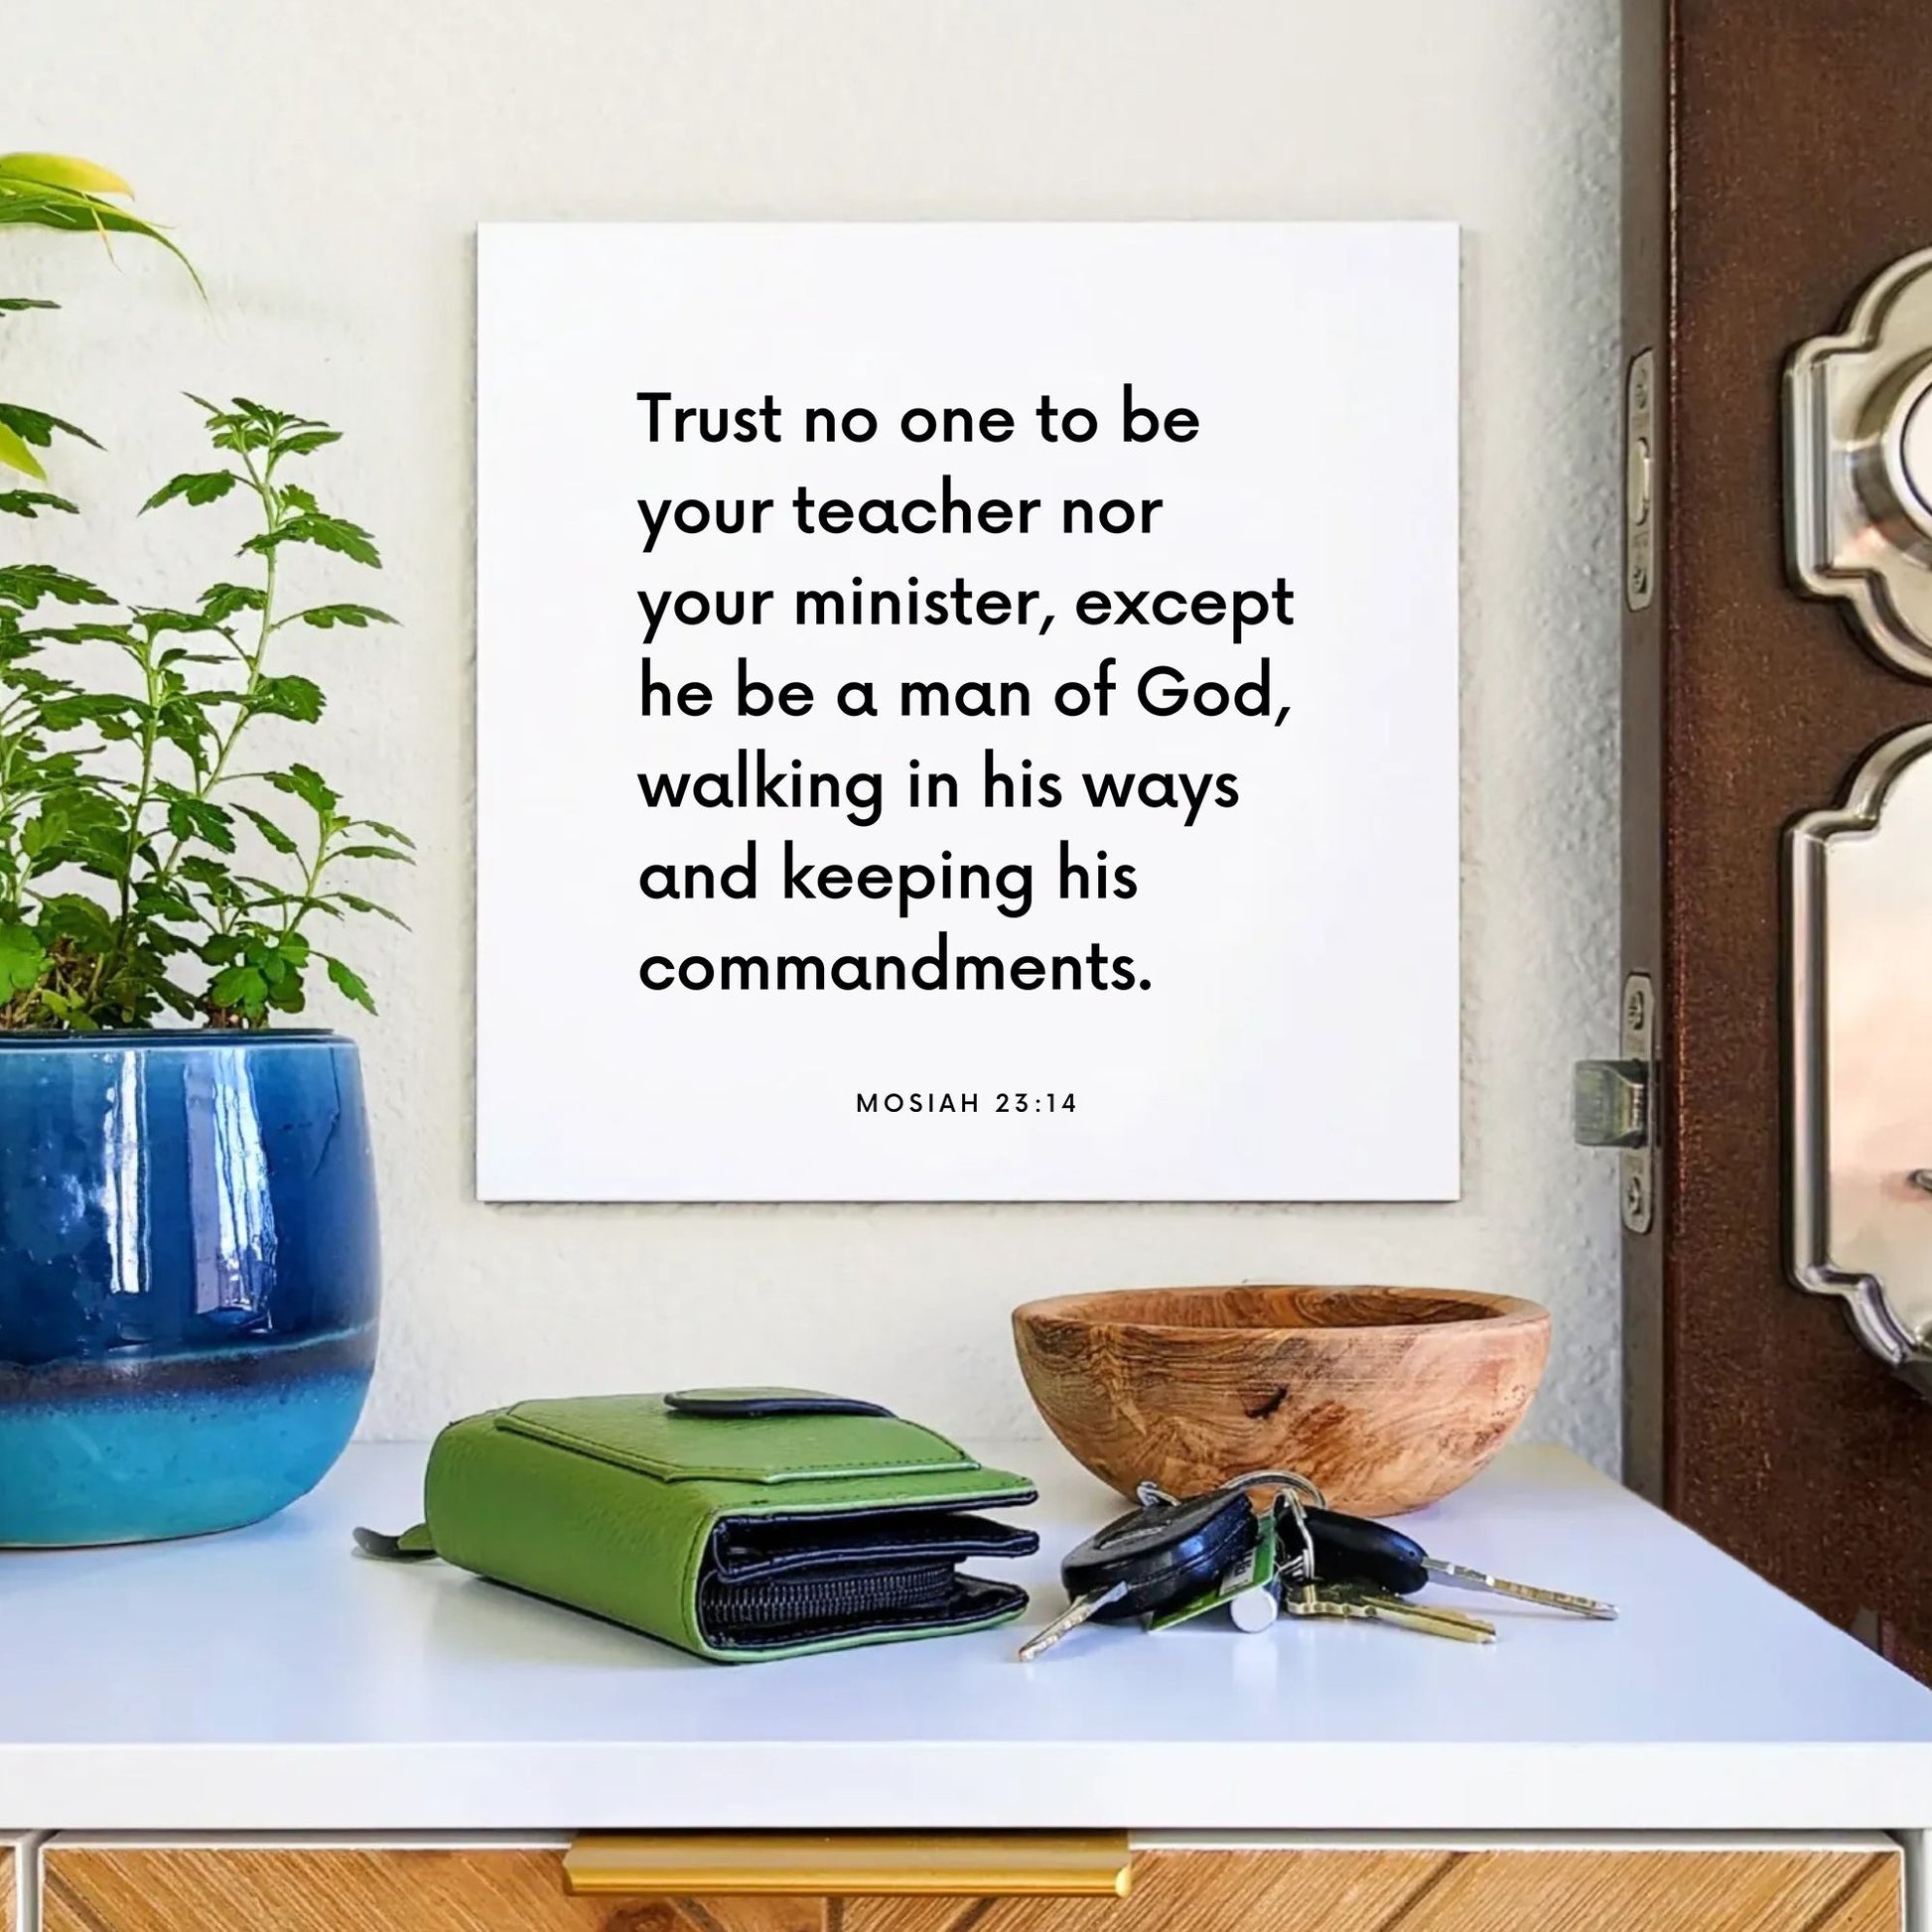 Entryway mouting of the scripture tile for Mosiah 23:14 - "Trust no one to be your teacher, except he be a man of God"